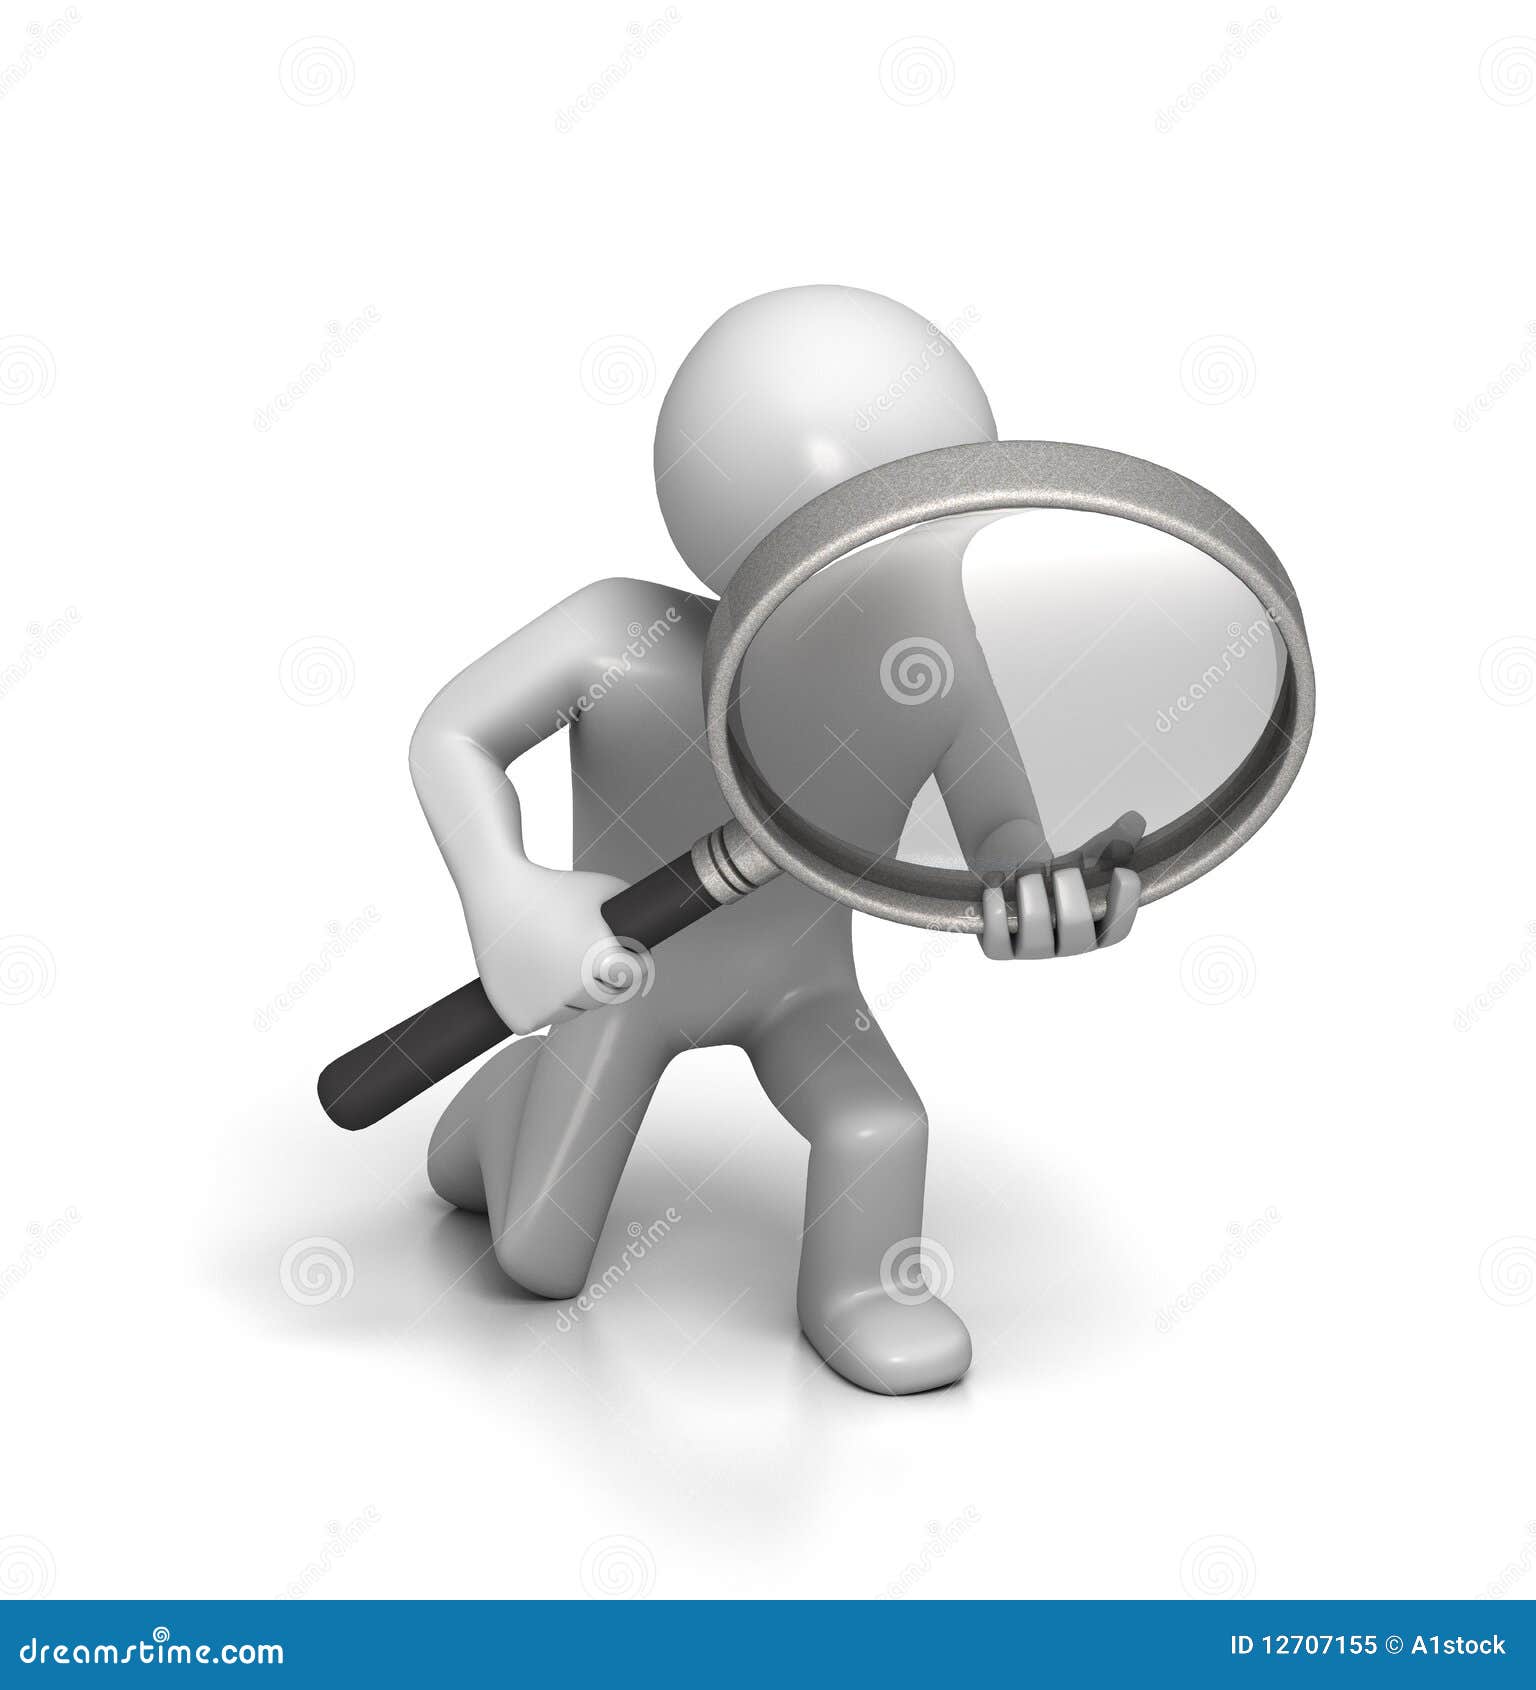 quality inspector clipart - photo #5